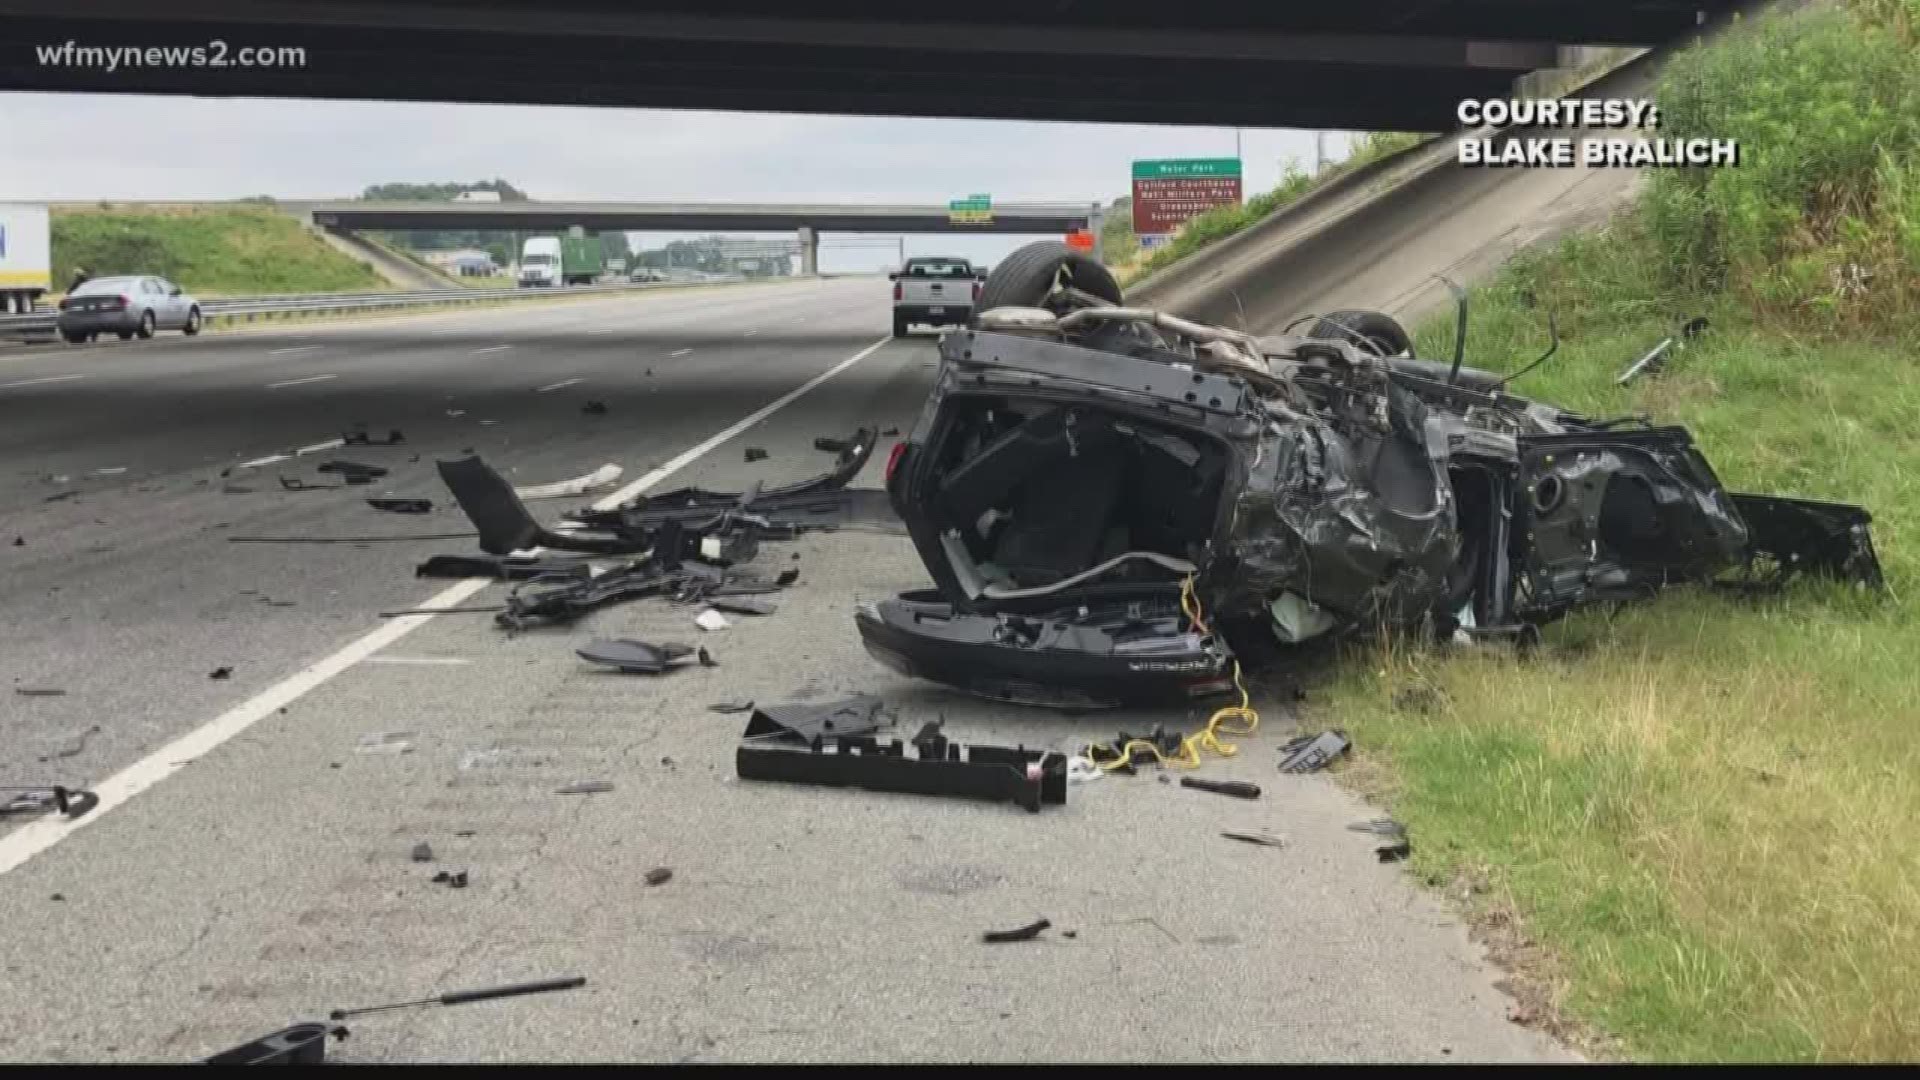 Douglas Kilgore died after he crashed, driving the wrong way on the interstate. The deadly accident shocked family, friends, and colleagues, who say it doesn’t add up. Some believe low blood sugar contributed to the crash.